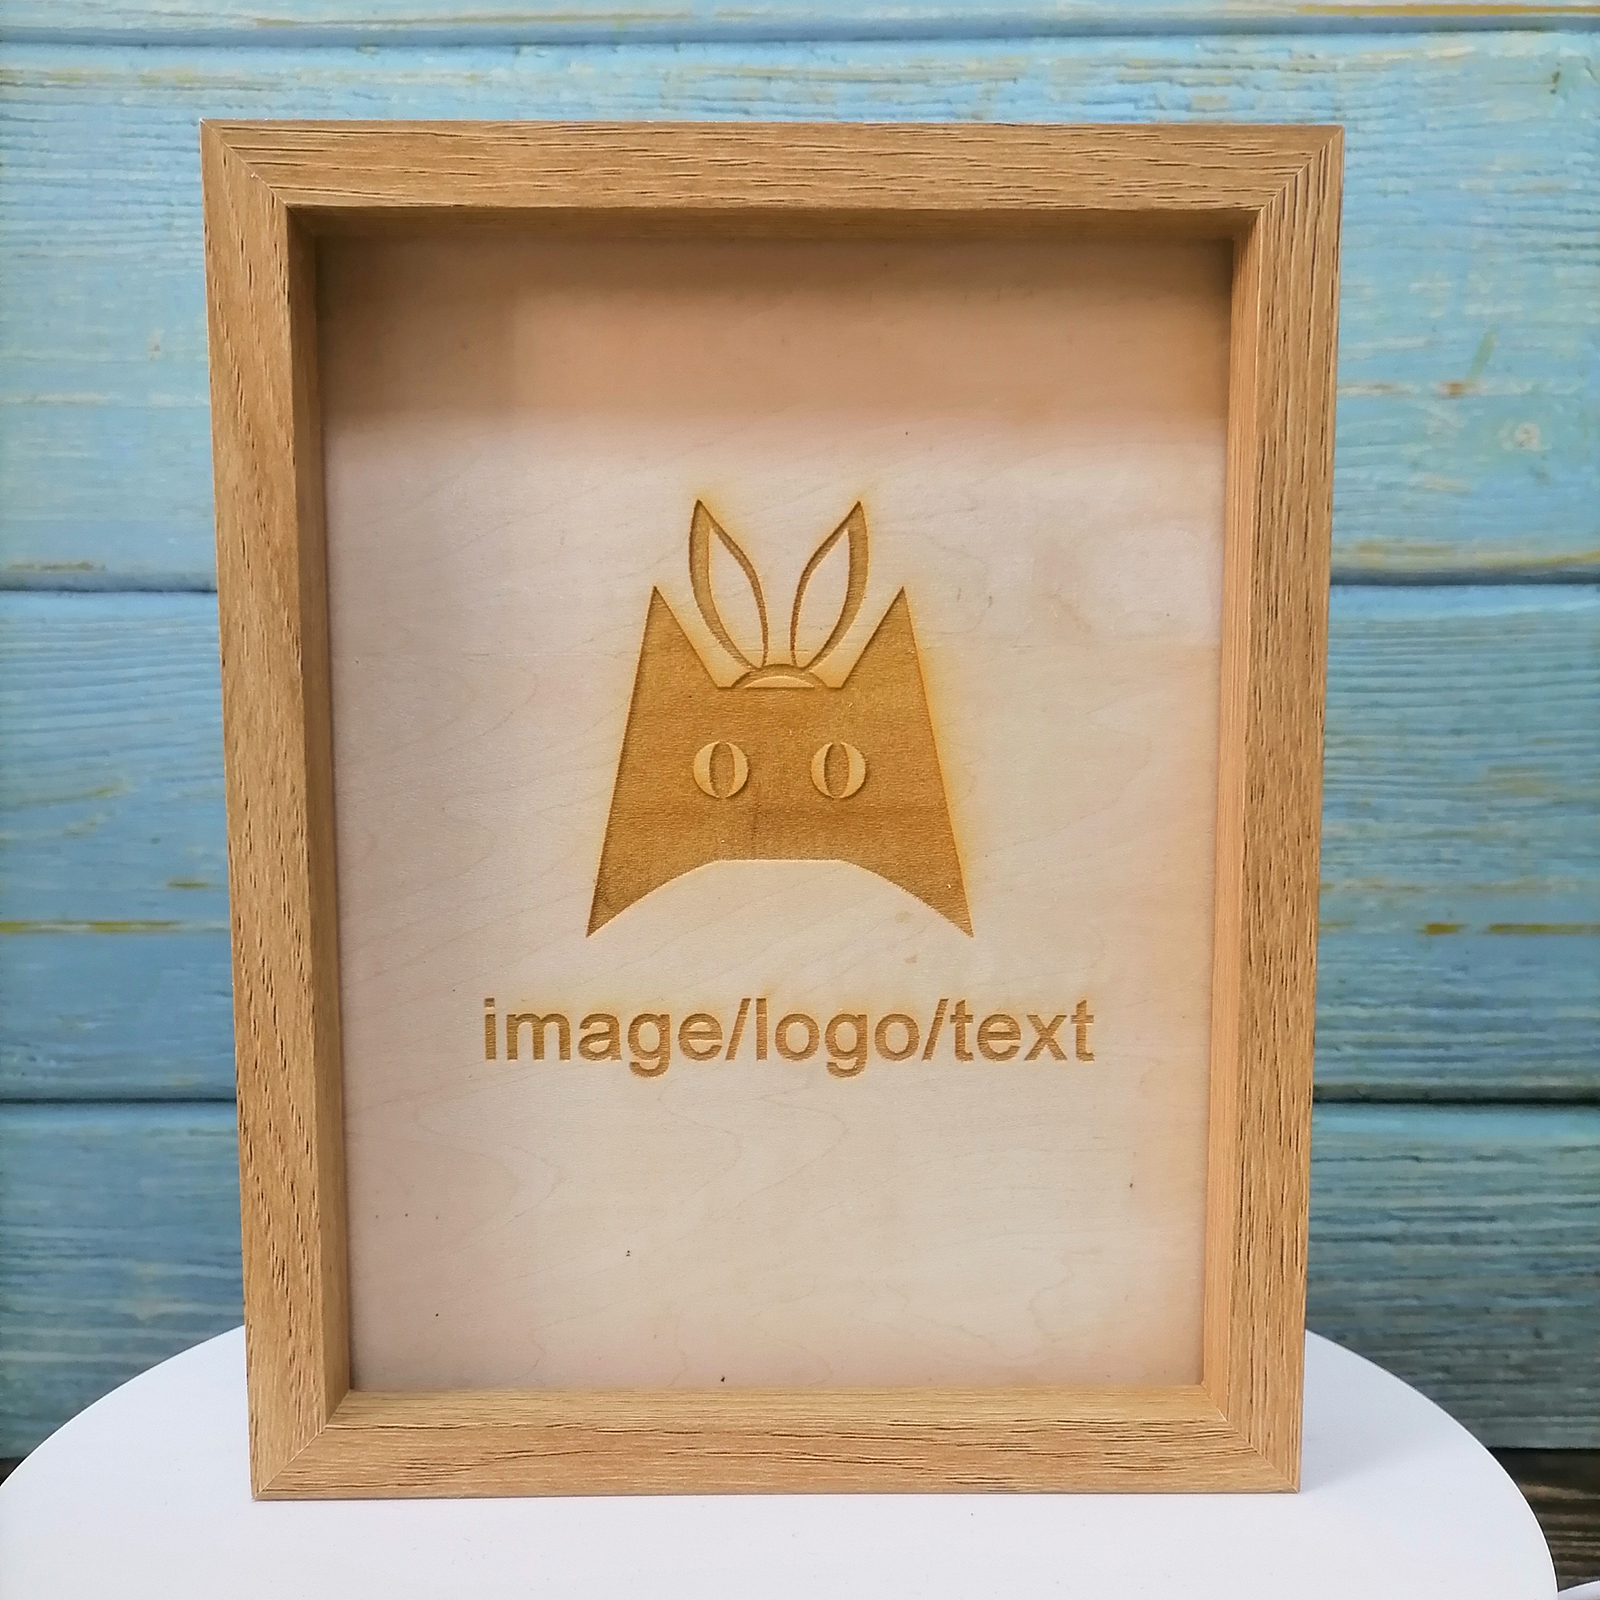 Custom Made Floating Frame Personalized Carved Picture Photo Frame Engraved Wood Board Unique Painting Gift